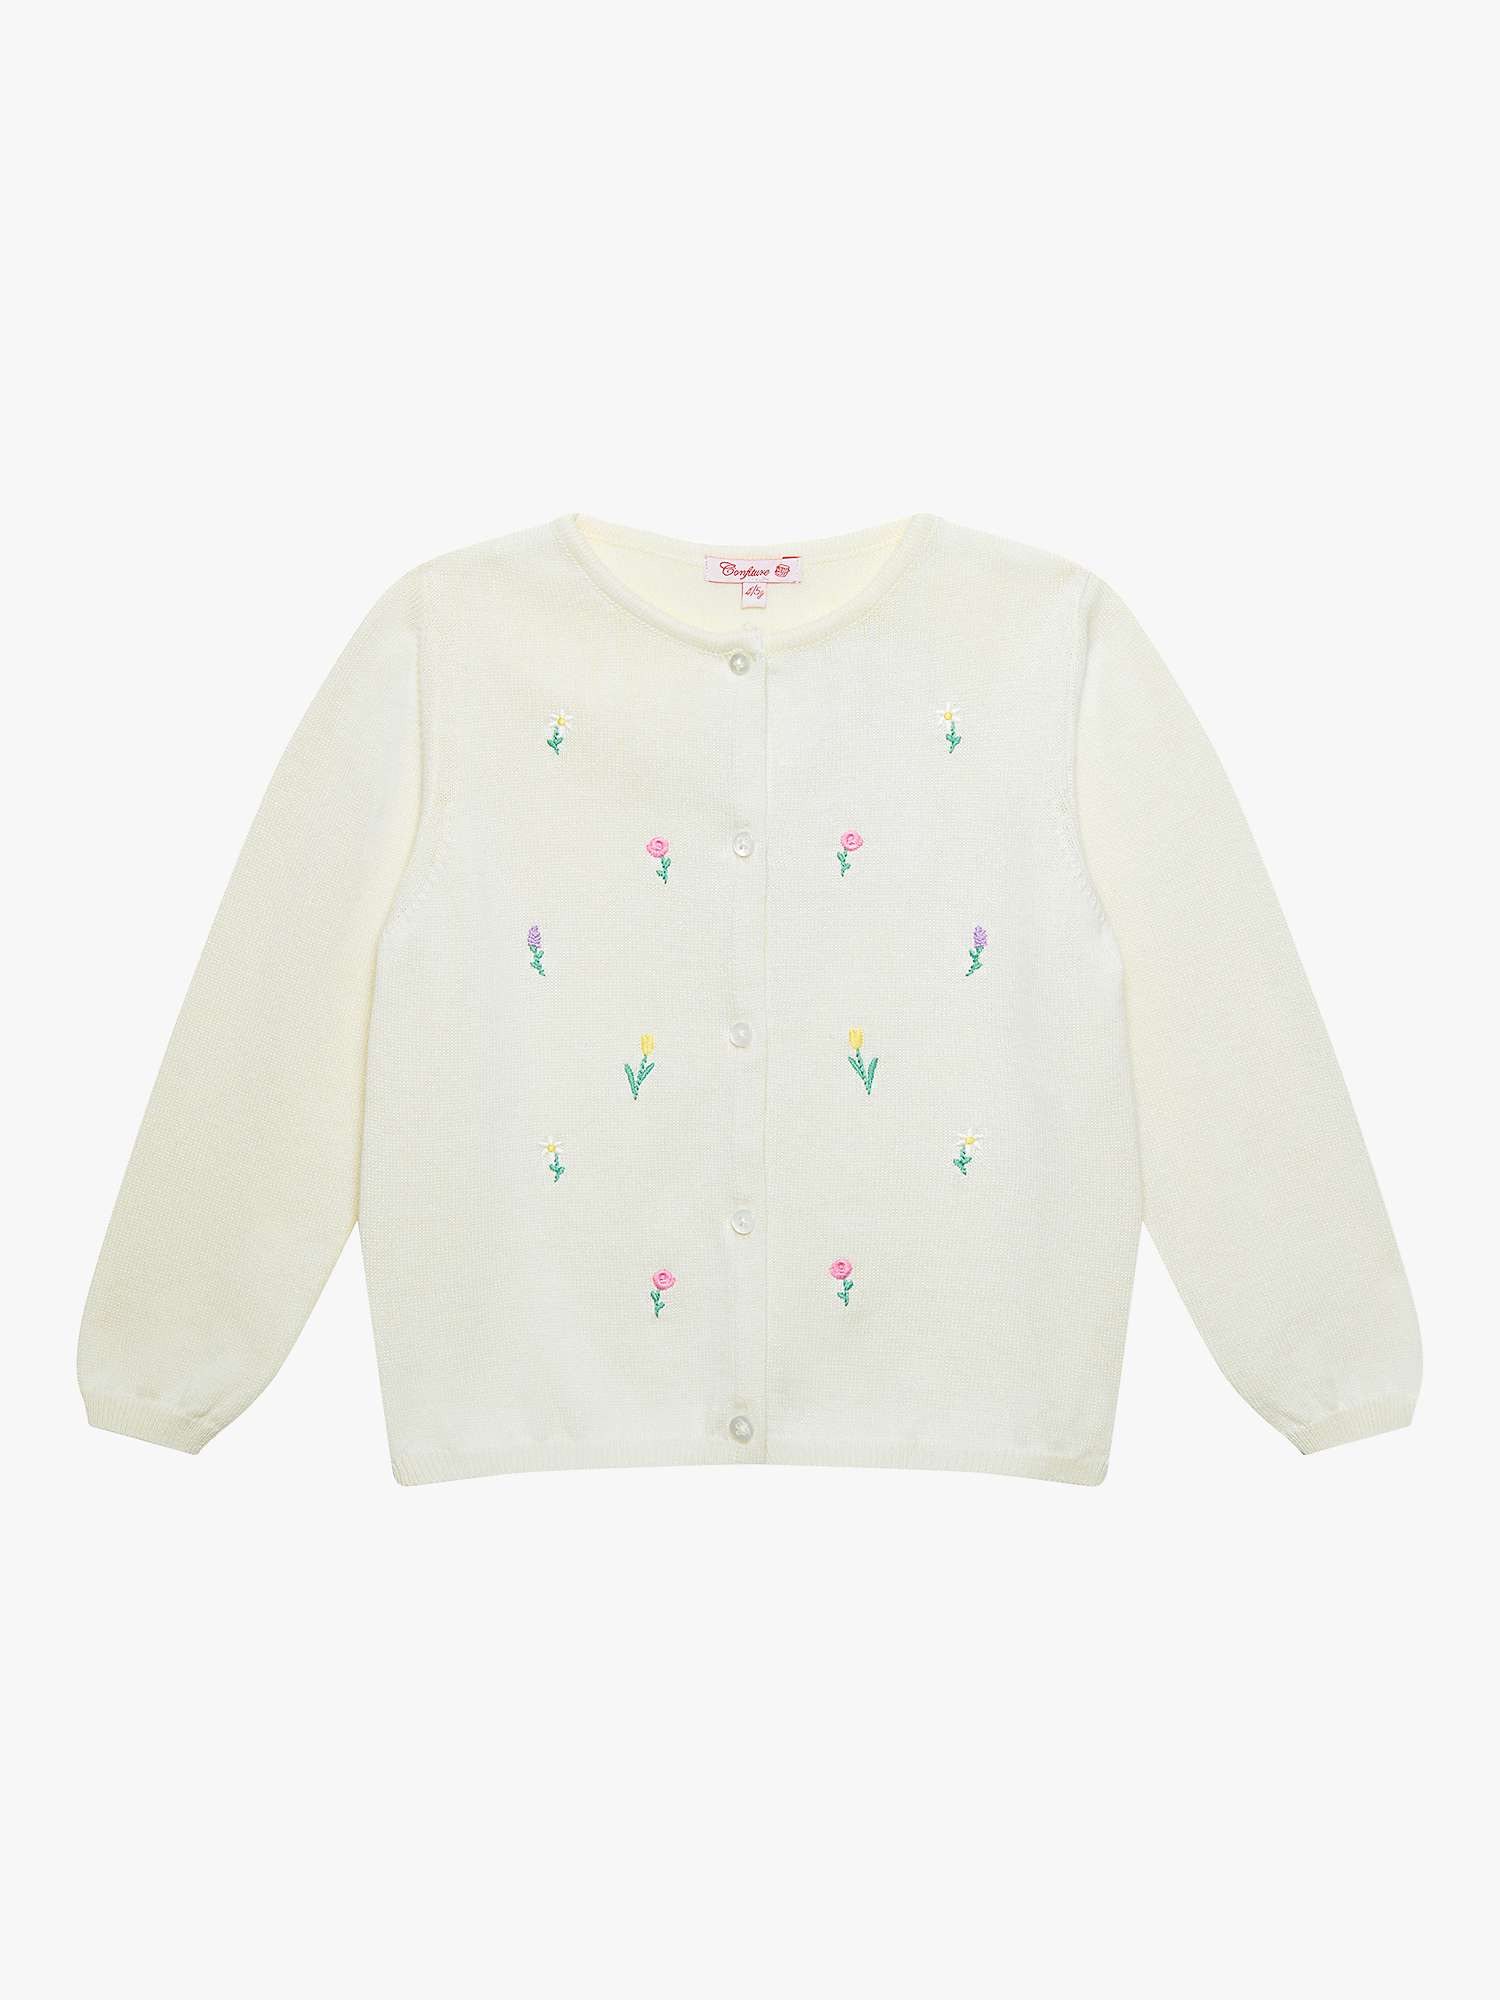 Buy Trotters Baby Pretty Floral Cardigan, Ivory Online at johnlewis.com